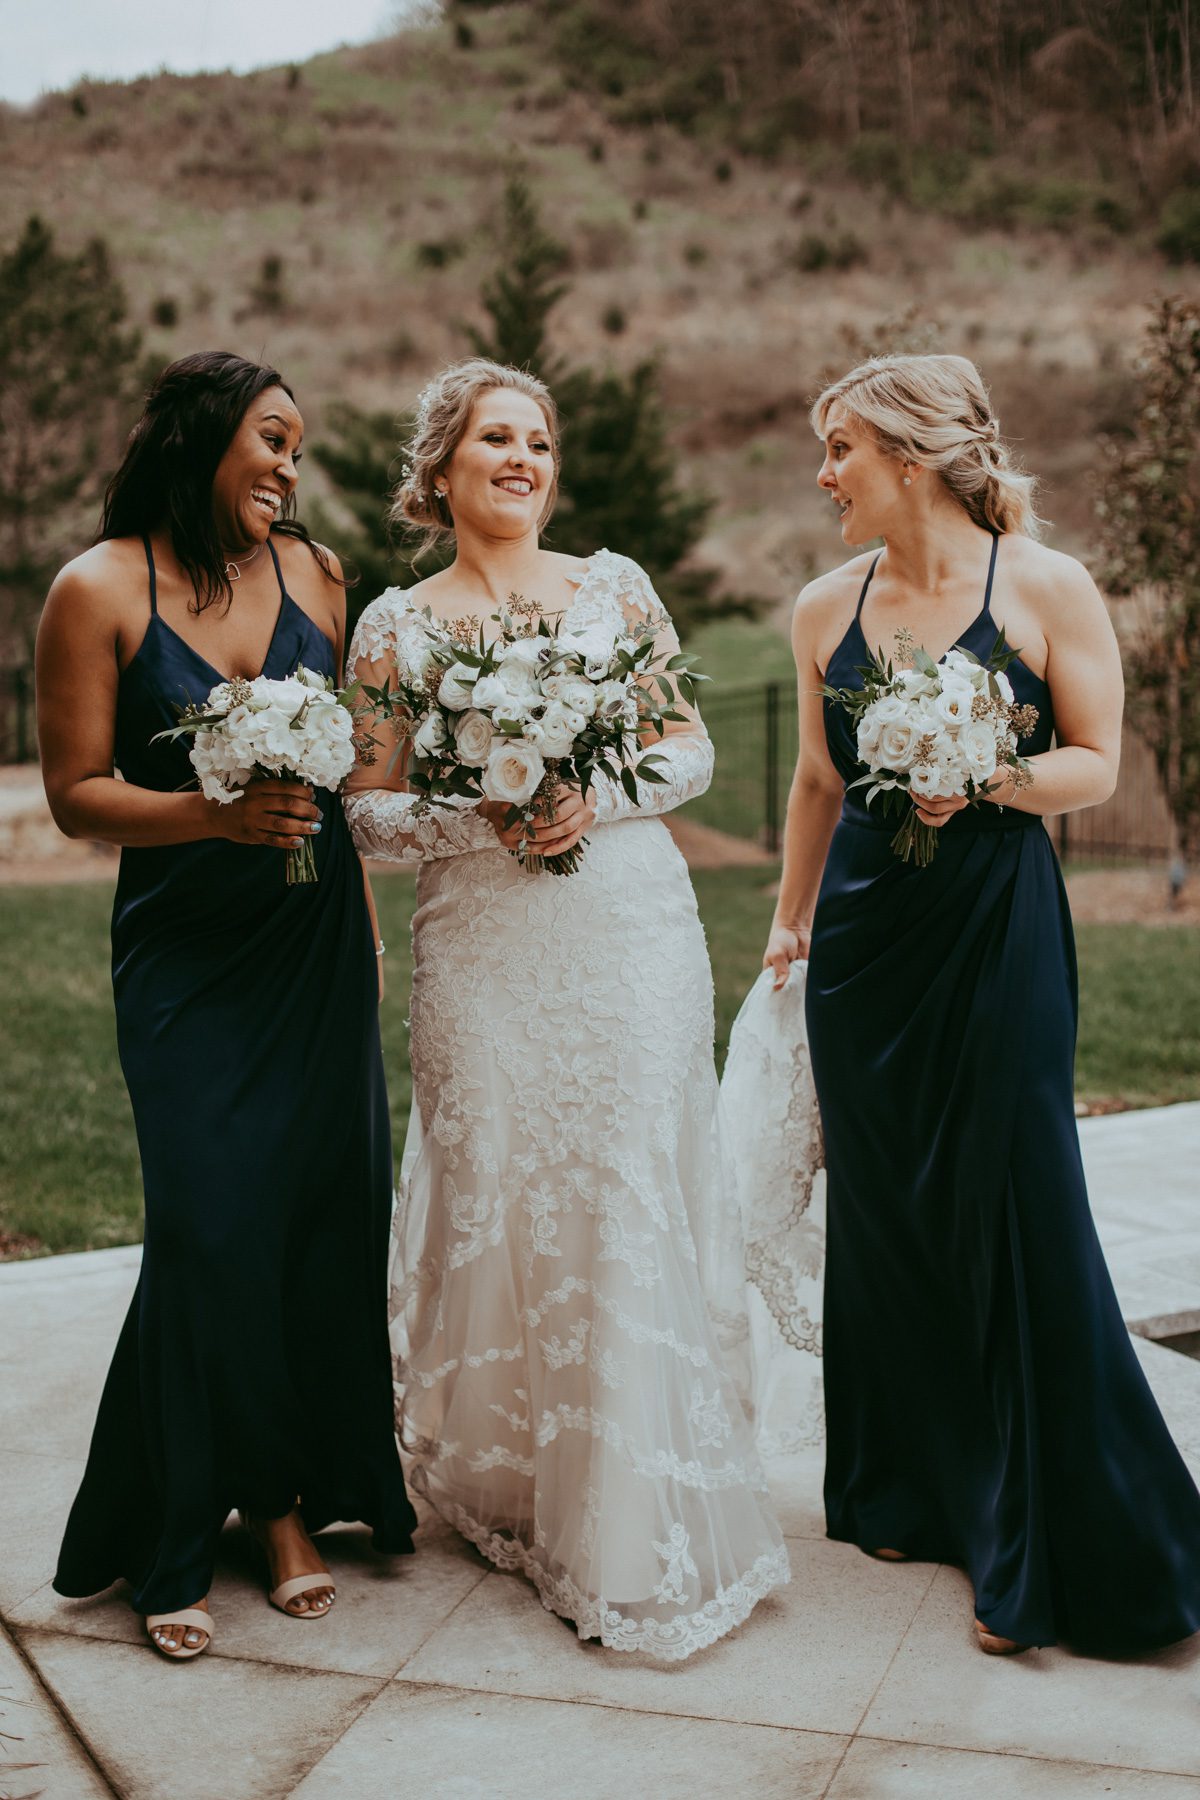 Candid wedding photography with bride and bridesmaids hanging out 